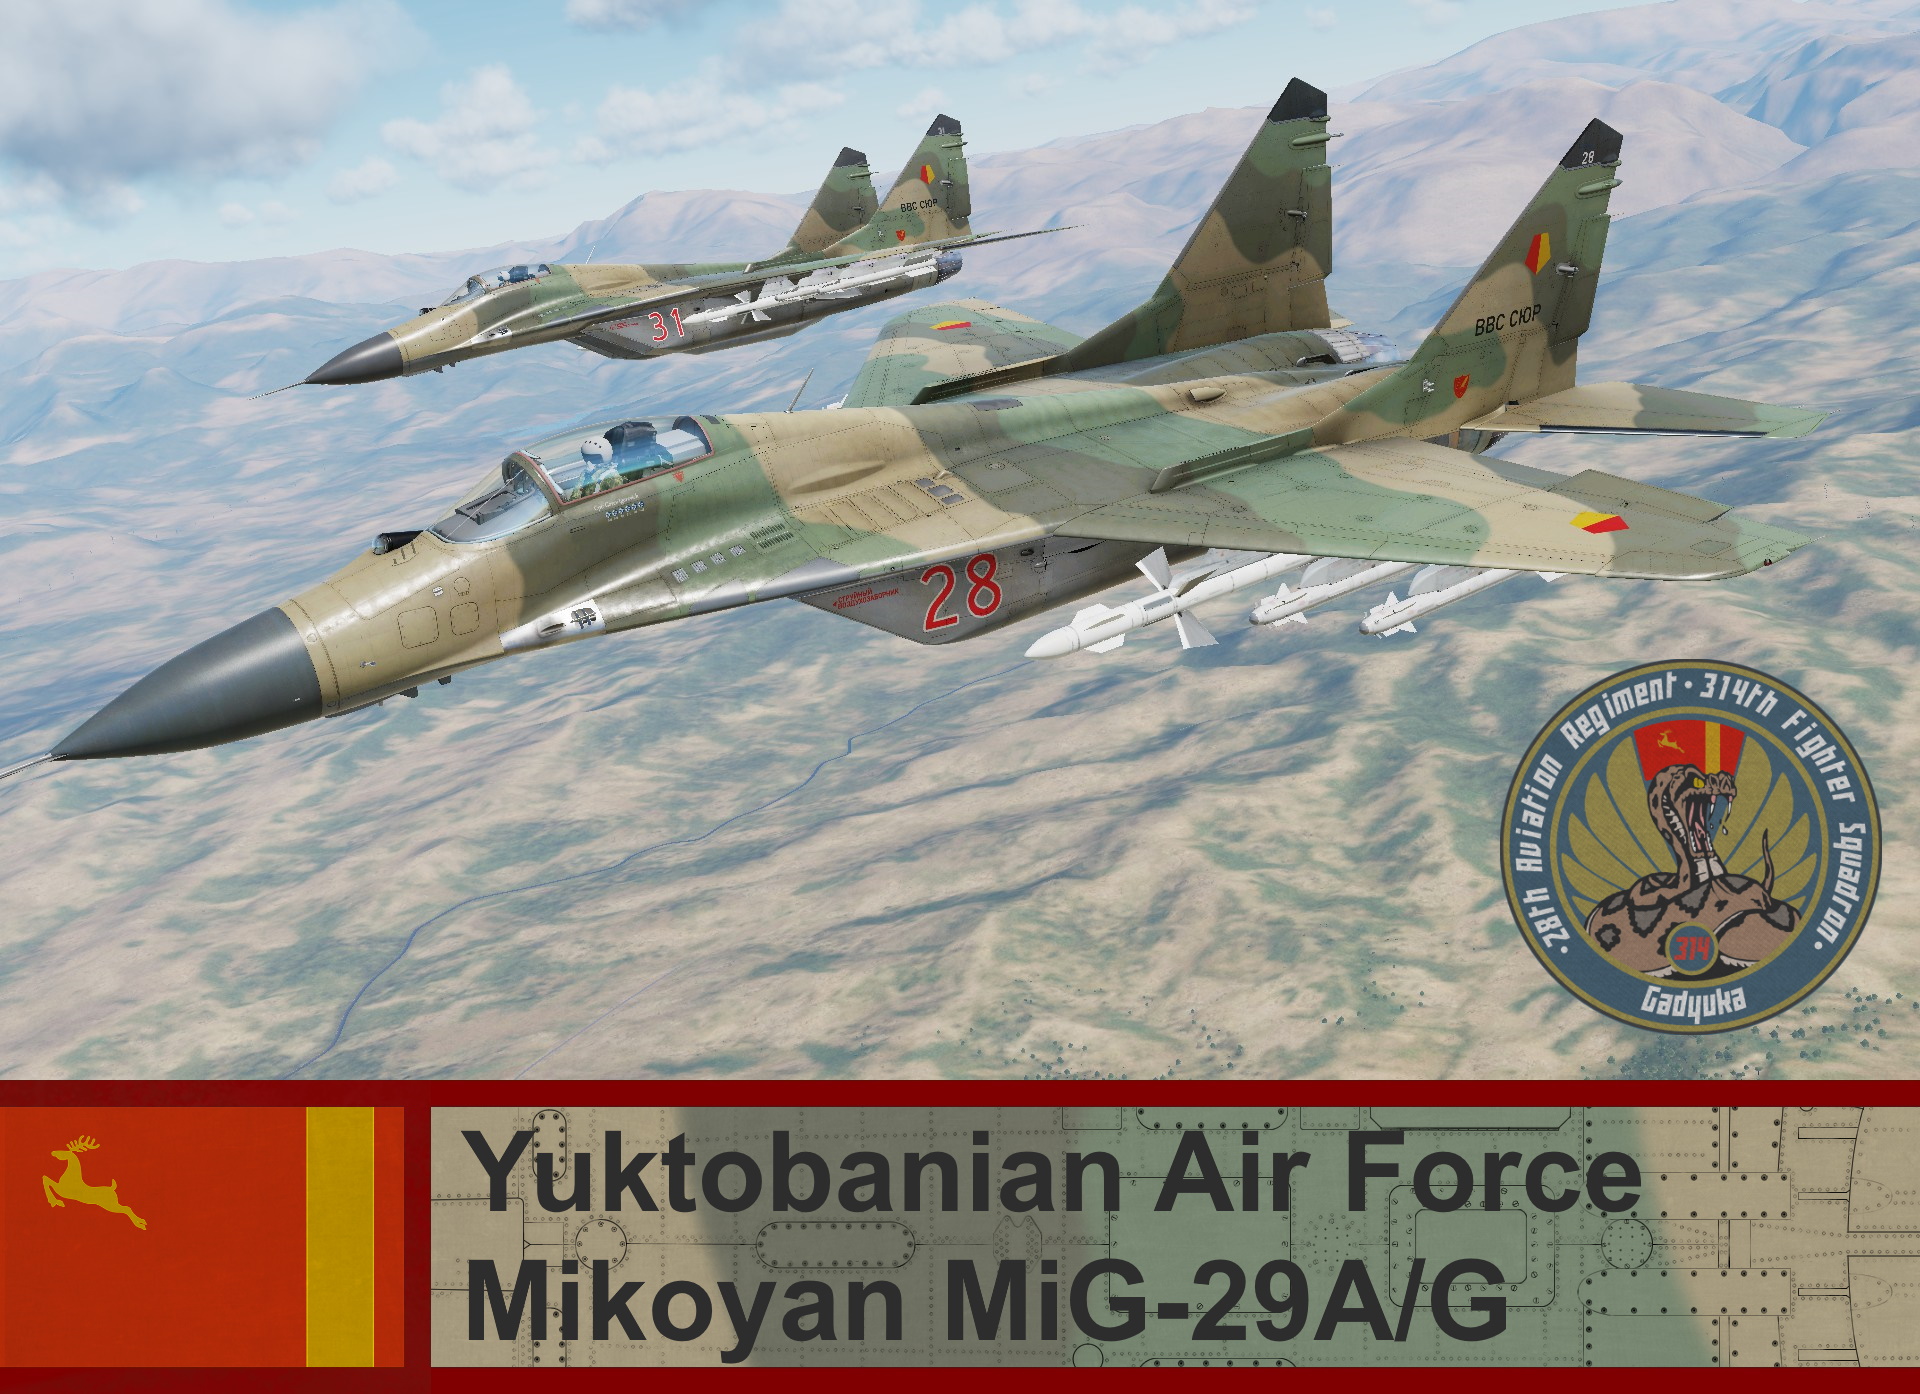 Yuktobanian Air Force Mig-29A/G - Ace Combat 5 (314th Fighter Squadron)